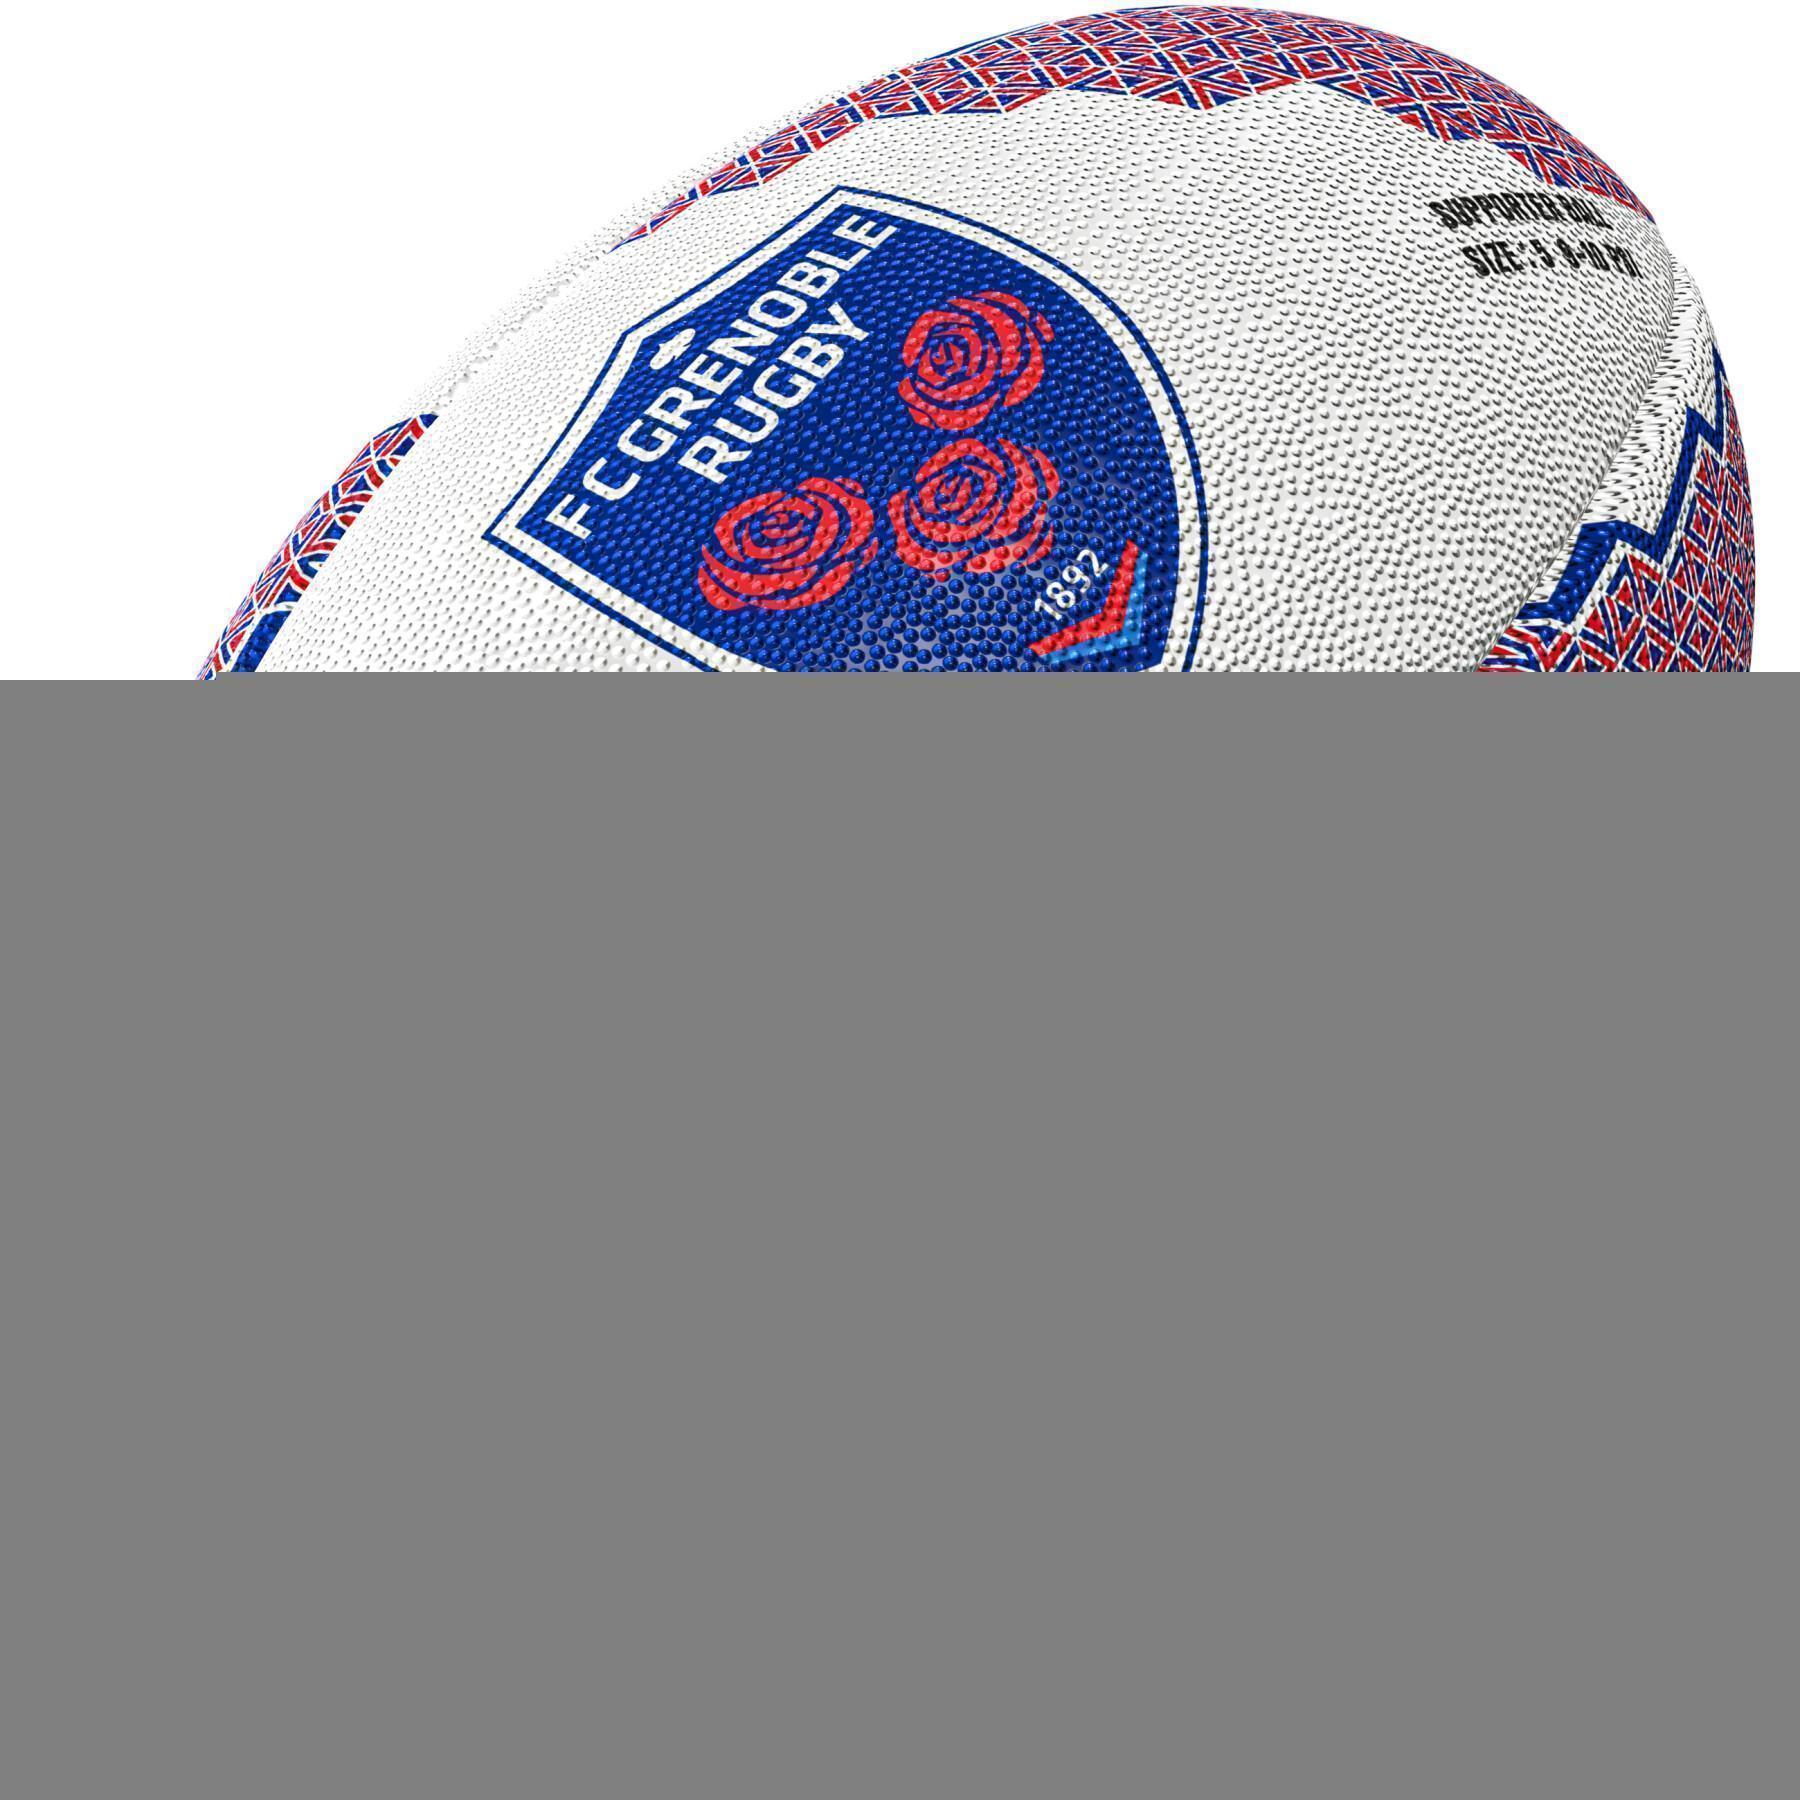 Rugbybal Grenoble Supporter